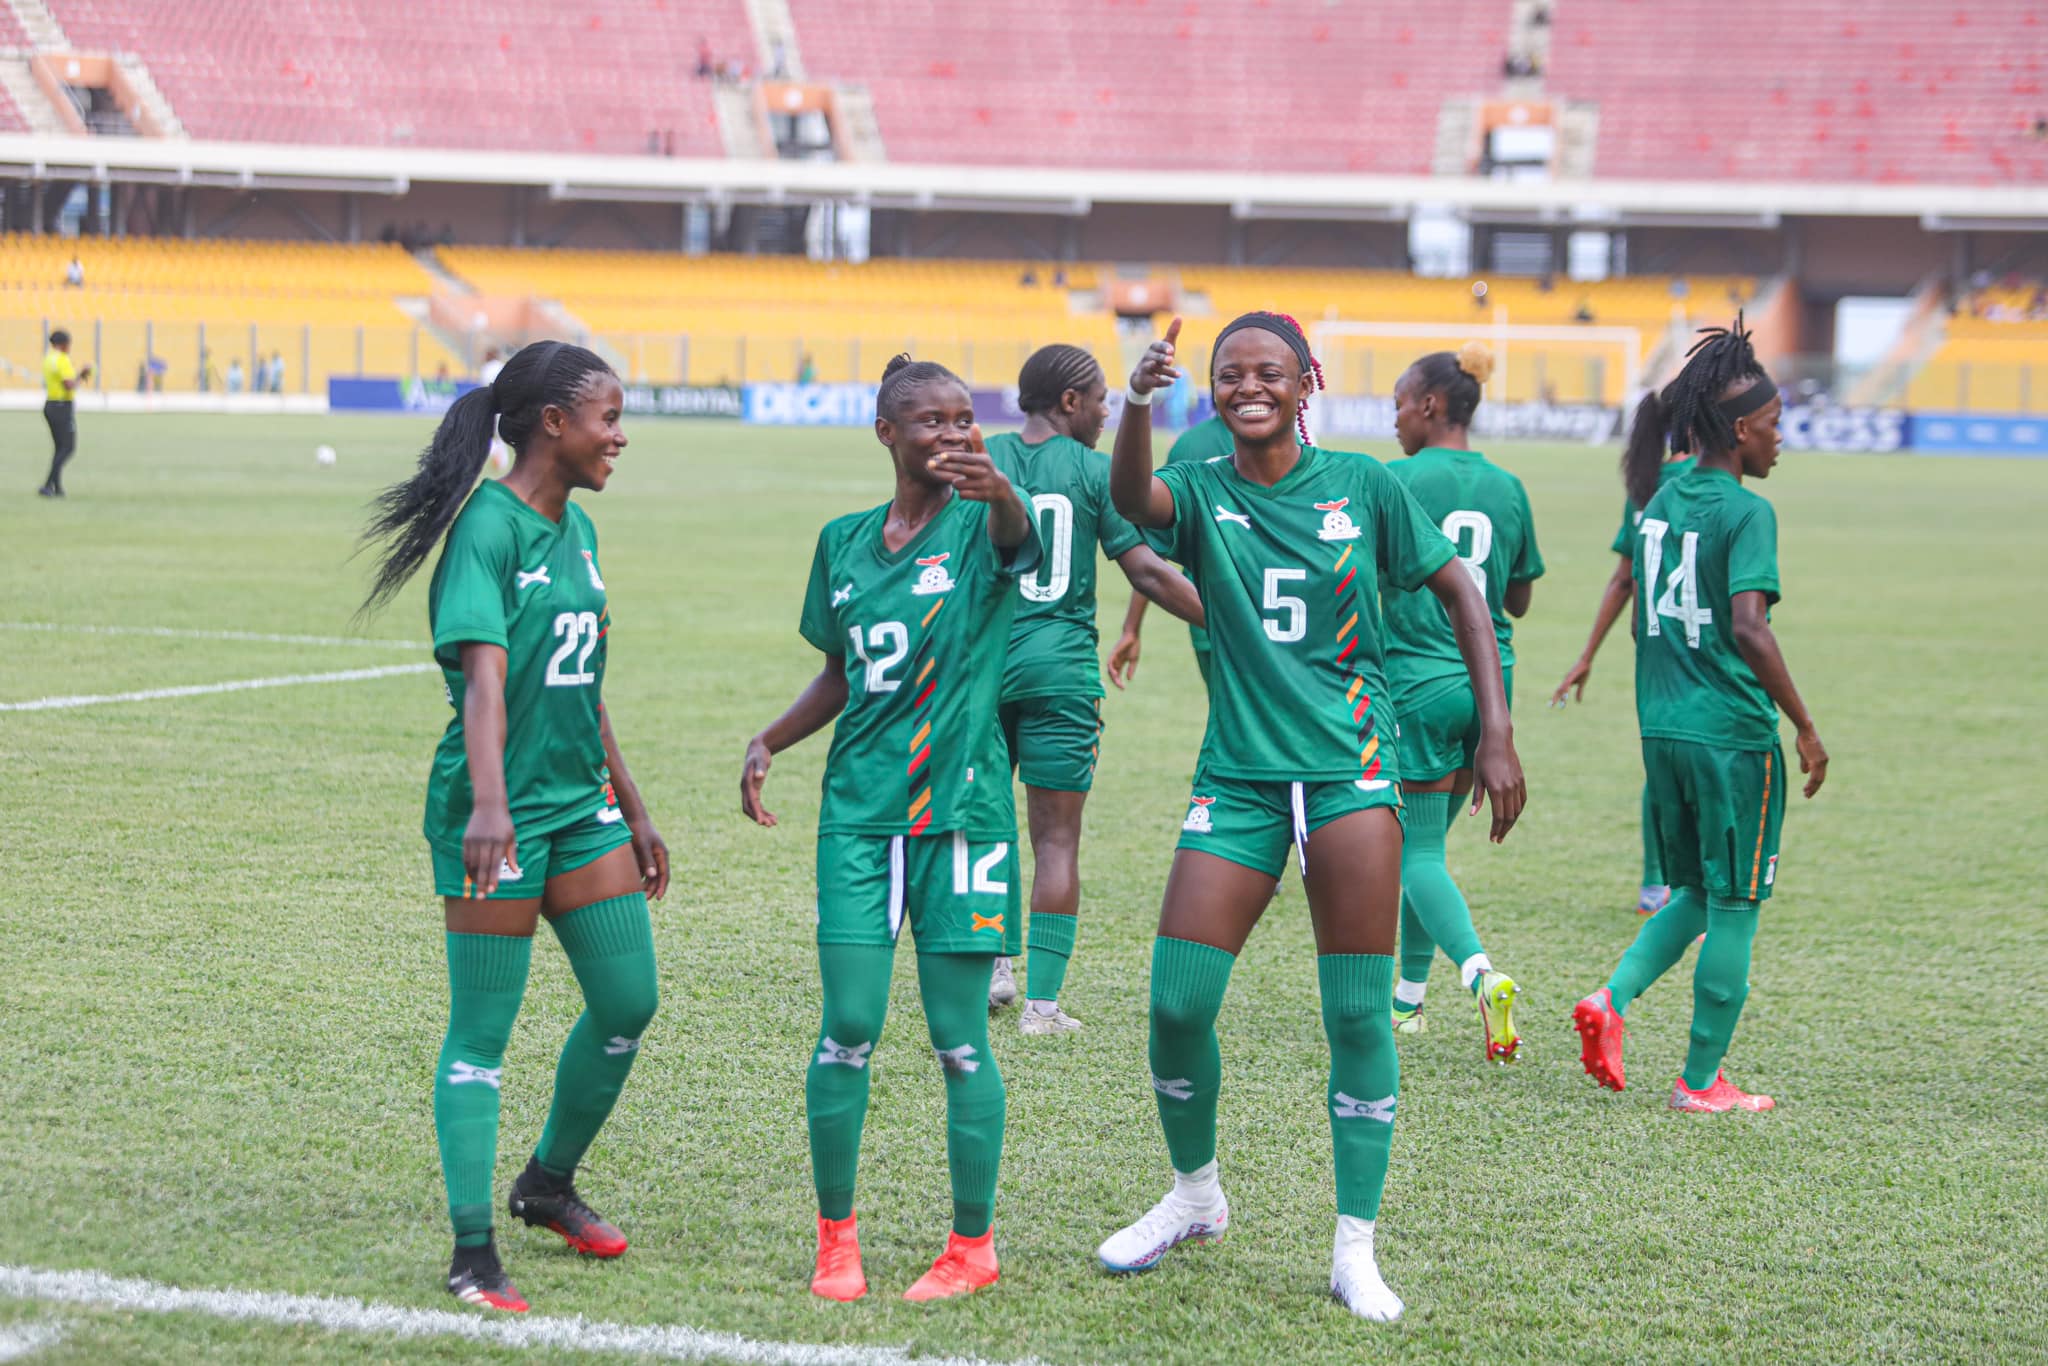 Zambia Edges Ghana 1-0 in First Leg of Paris 2024 Olympic Qualifiers